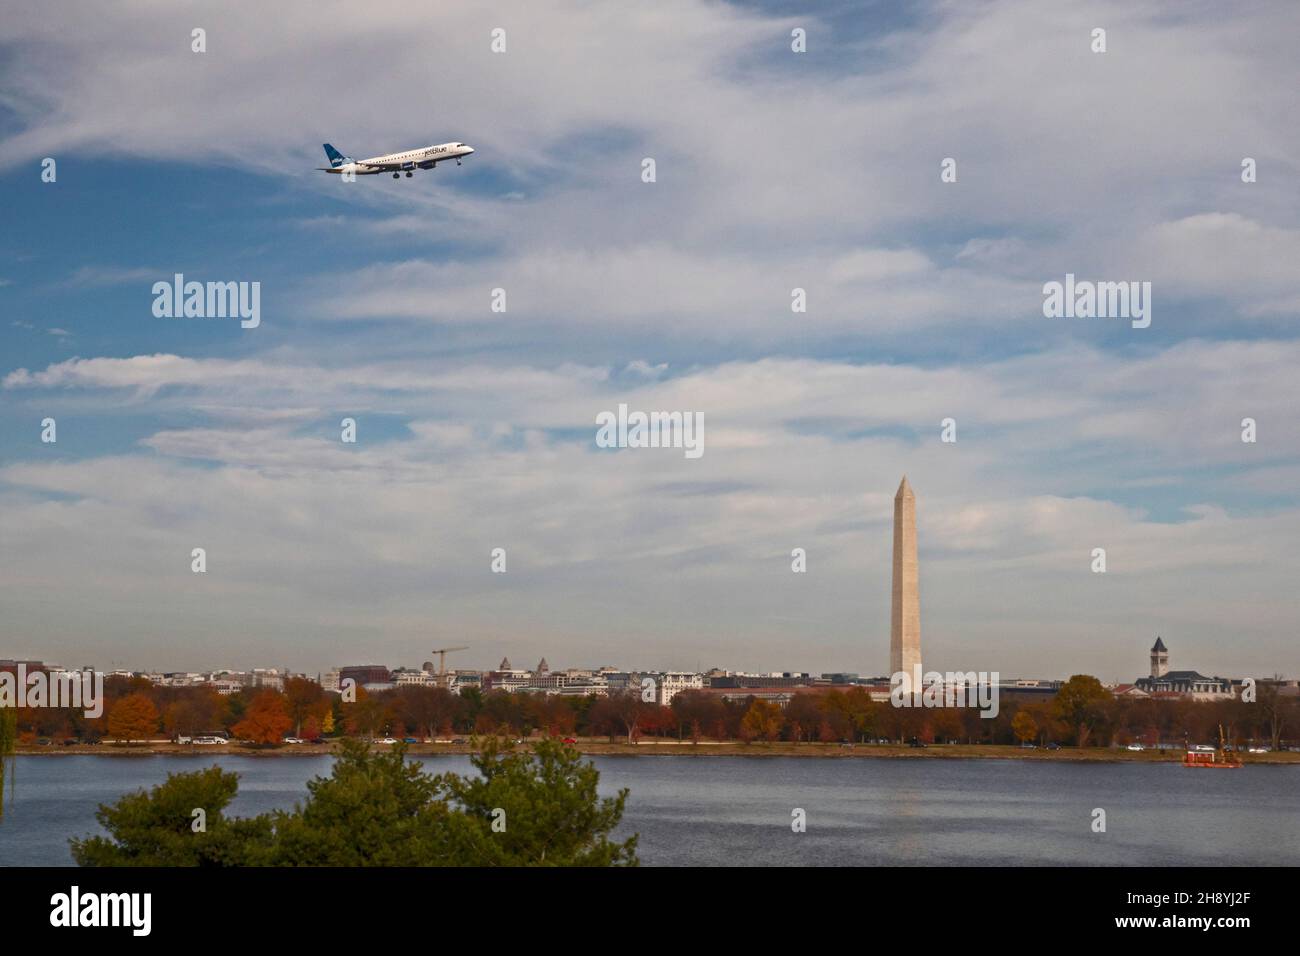 Washington, DC - A Jet Blue airliner on final approach to Ronald Reagan Washington National Airport flies over the Potomac River near the Washington M Stock Photo